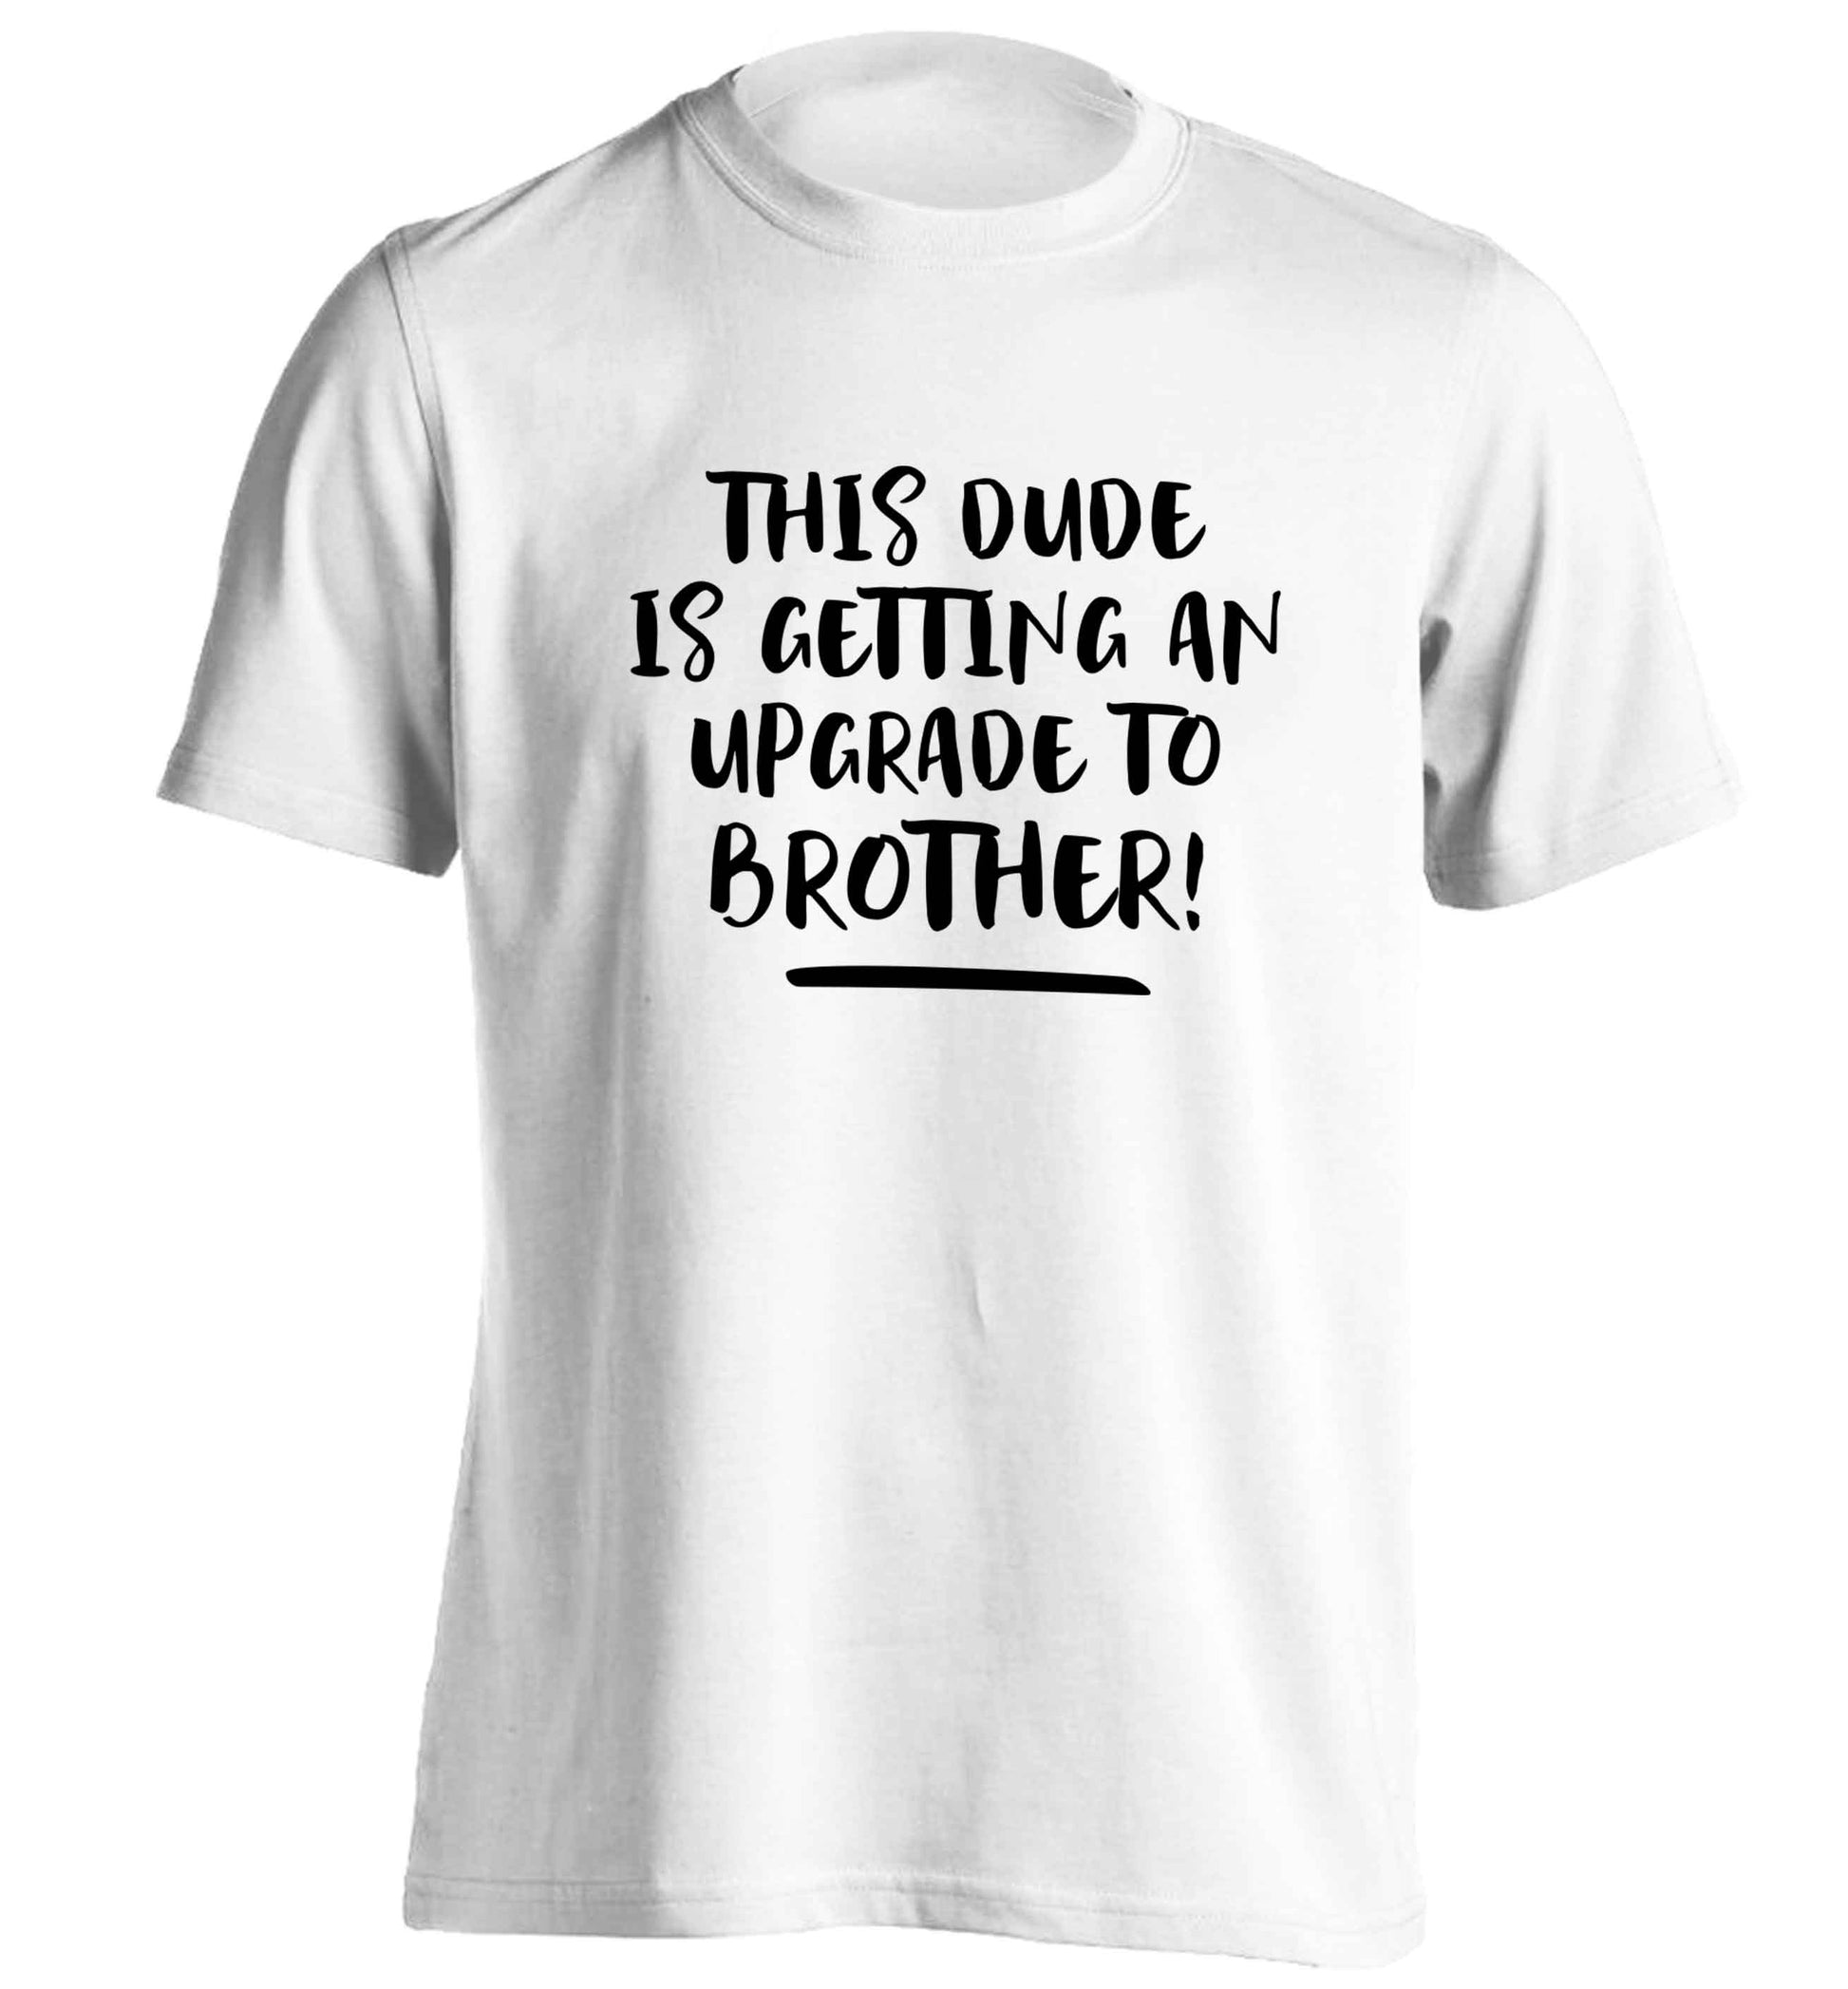 This dude is getting an upgrade to brother! adults unisex white Tshirt 2XL